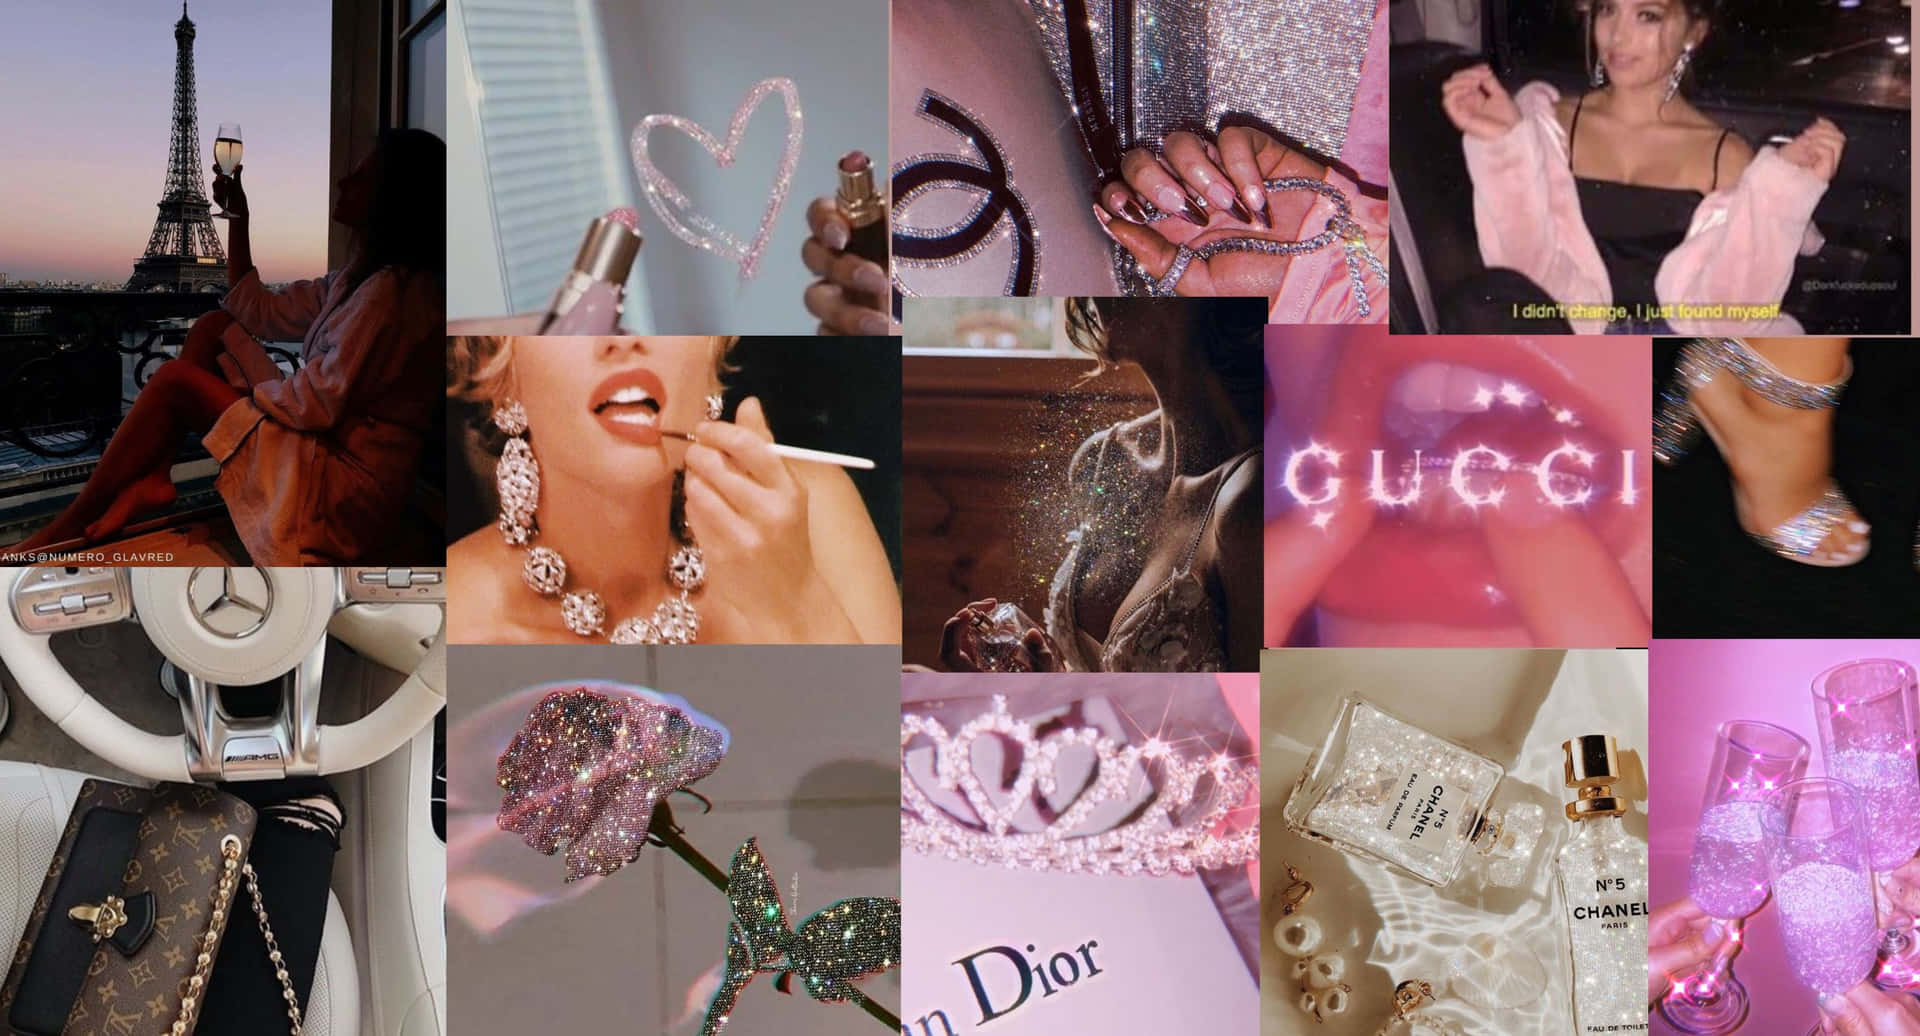 Rich Girl Aesthetic Collage Wallpaper